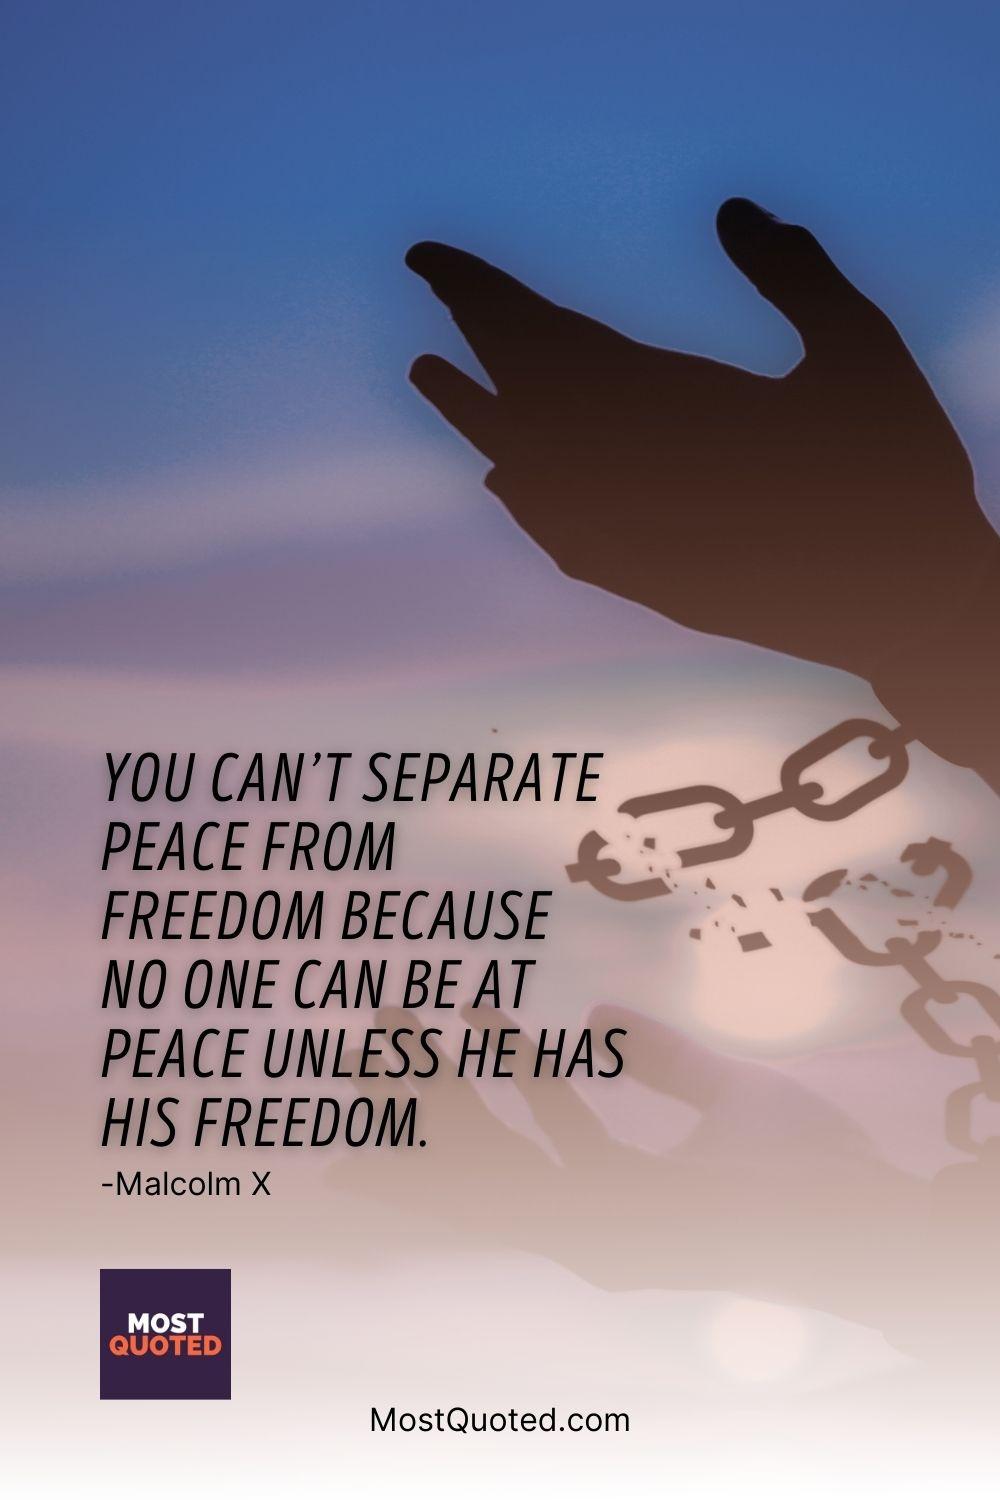 You can’t separate peace from freedom because no one can be at peace unless he has his freedom. - Malcolm X